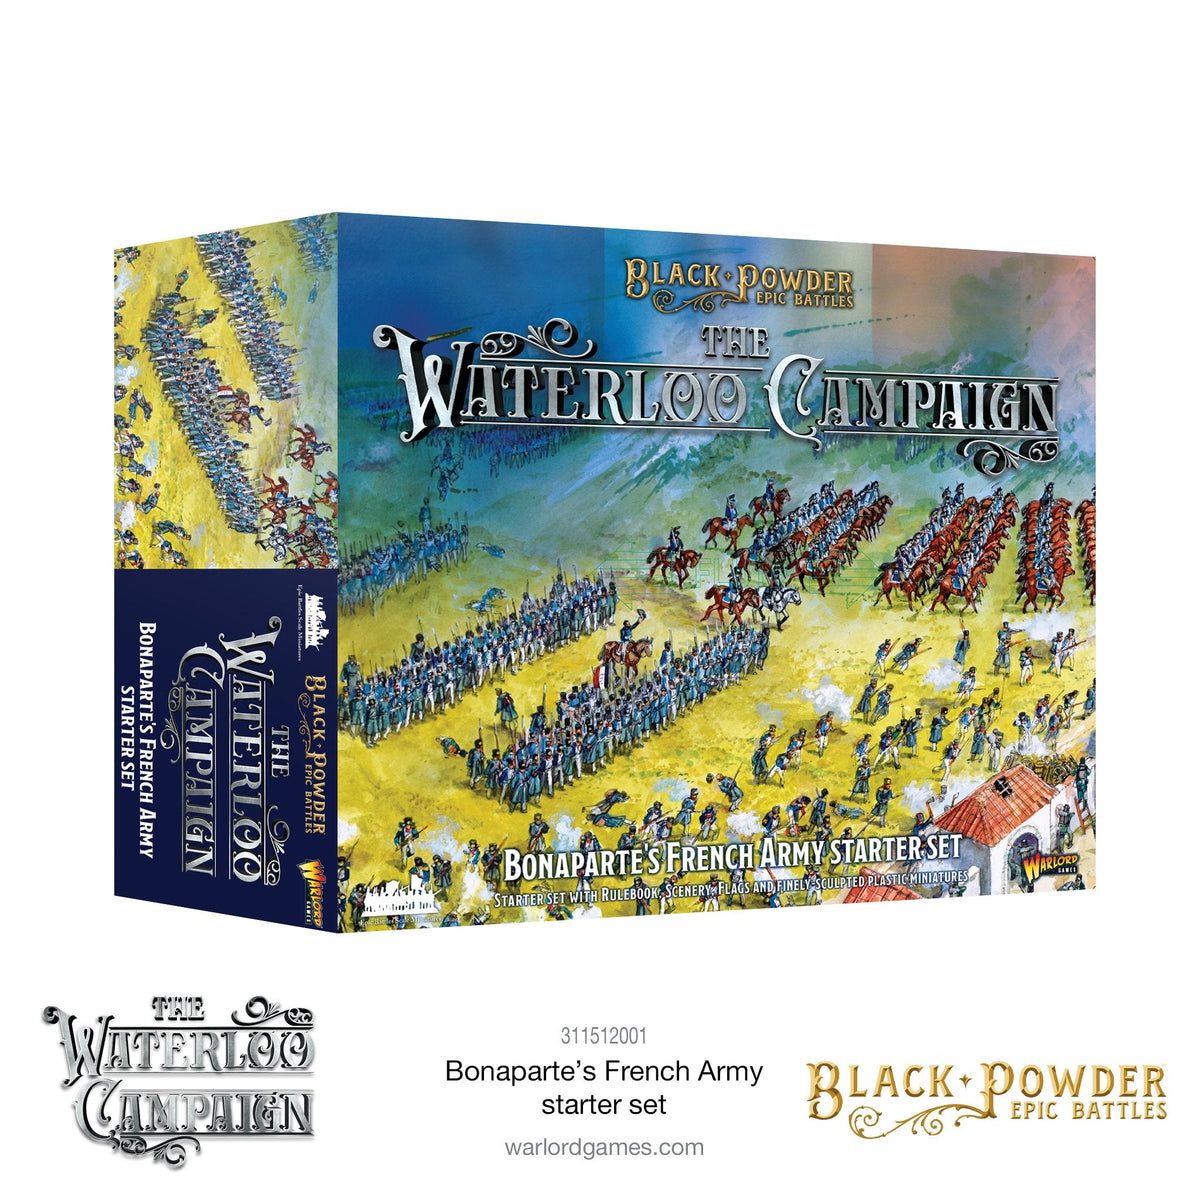 New: Napoleonic British Starter Army boxed set - Warlord Games